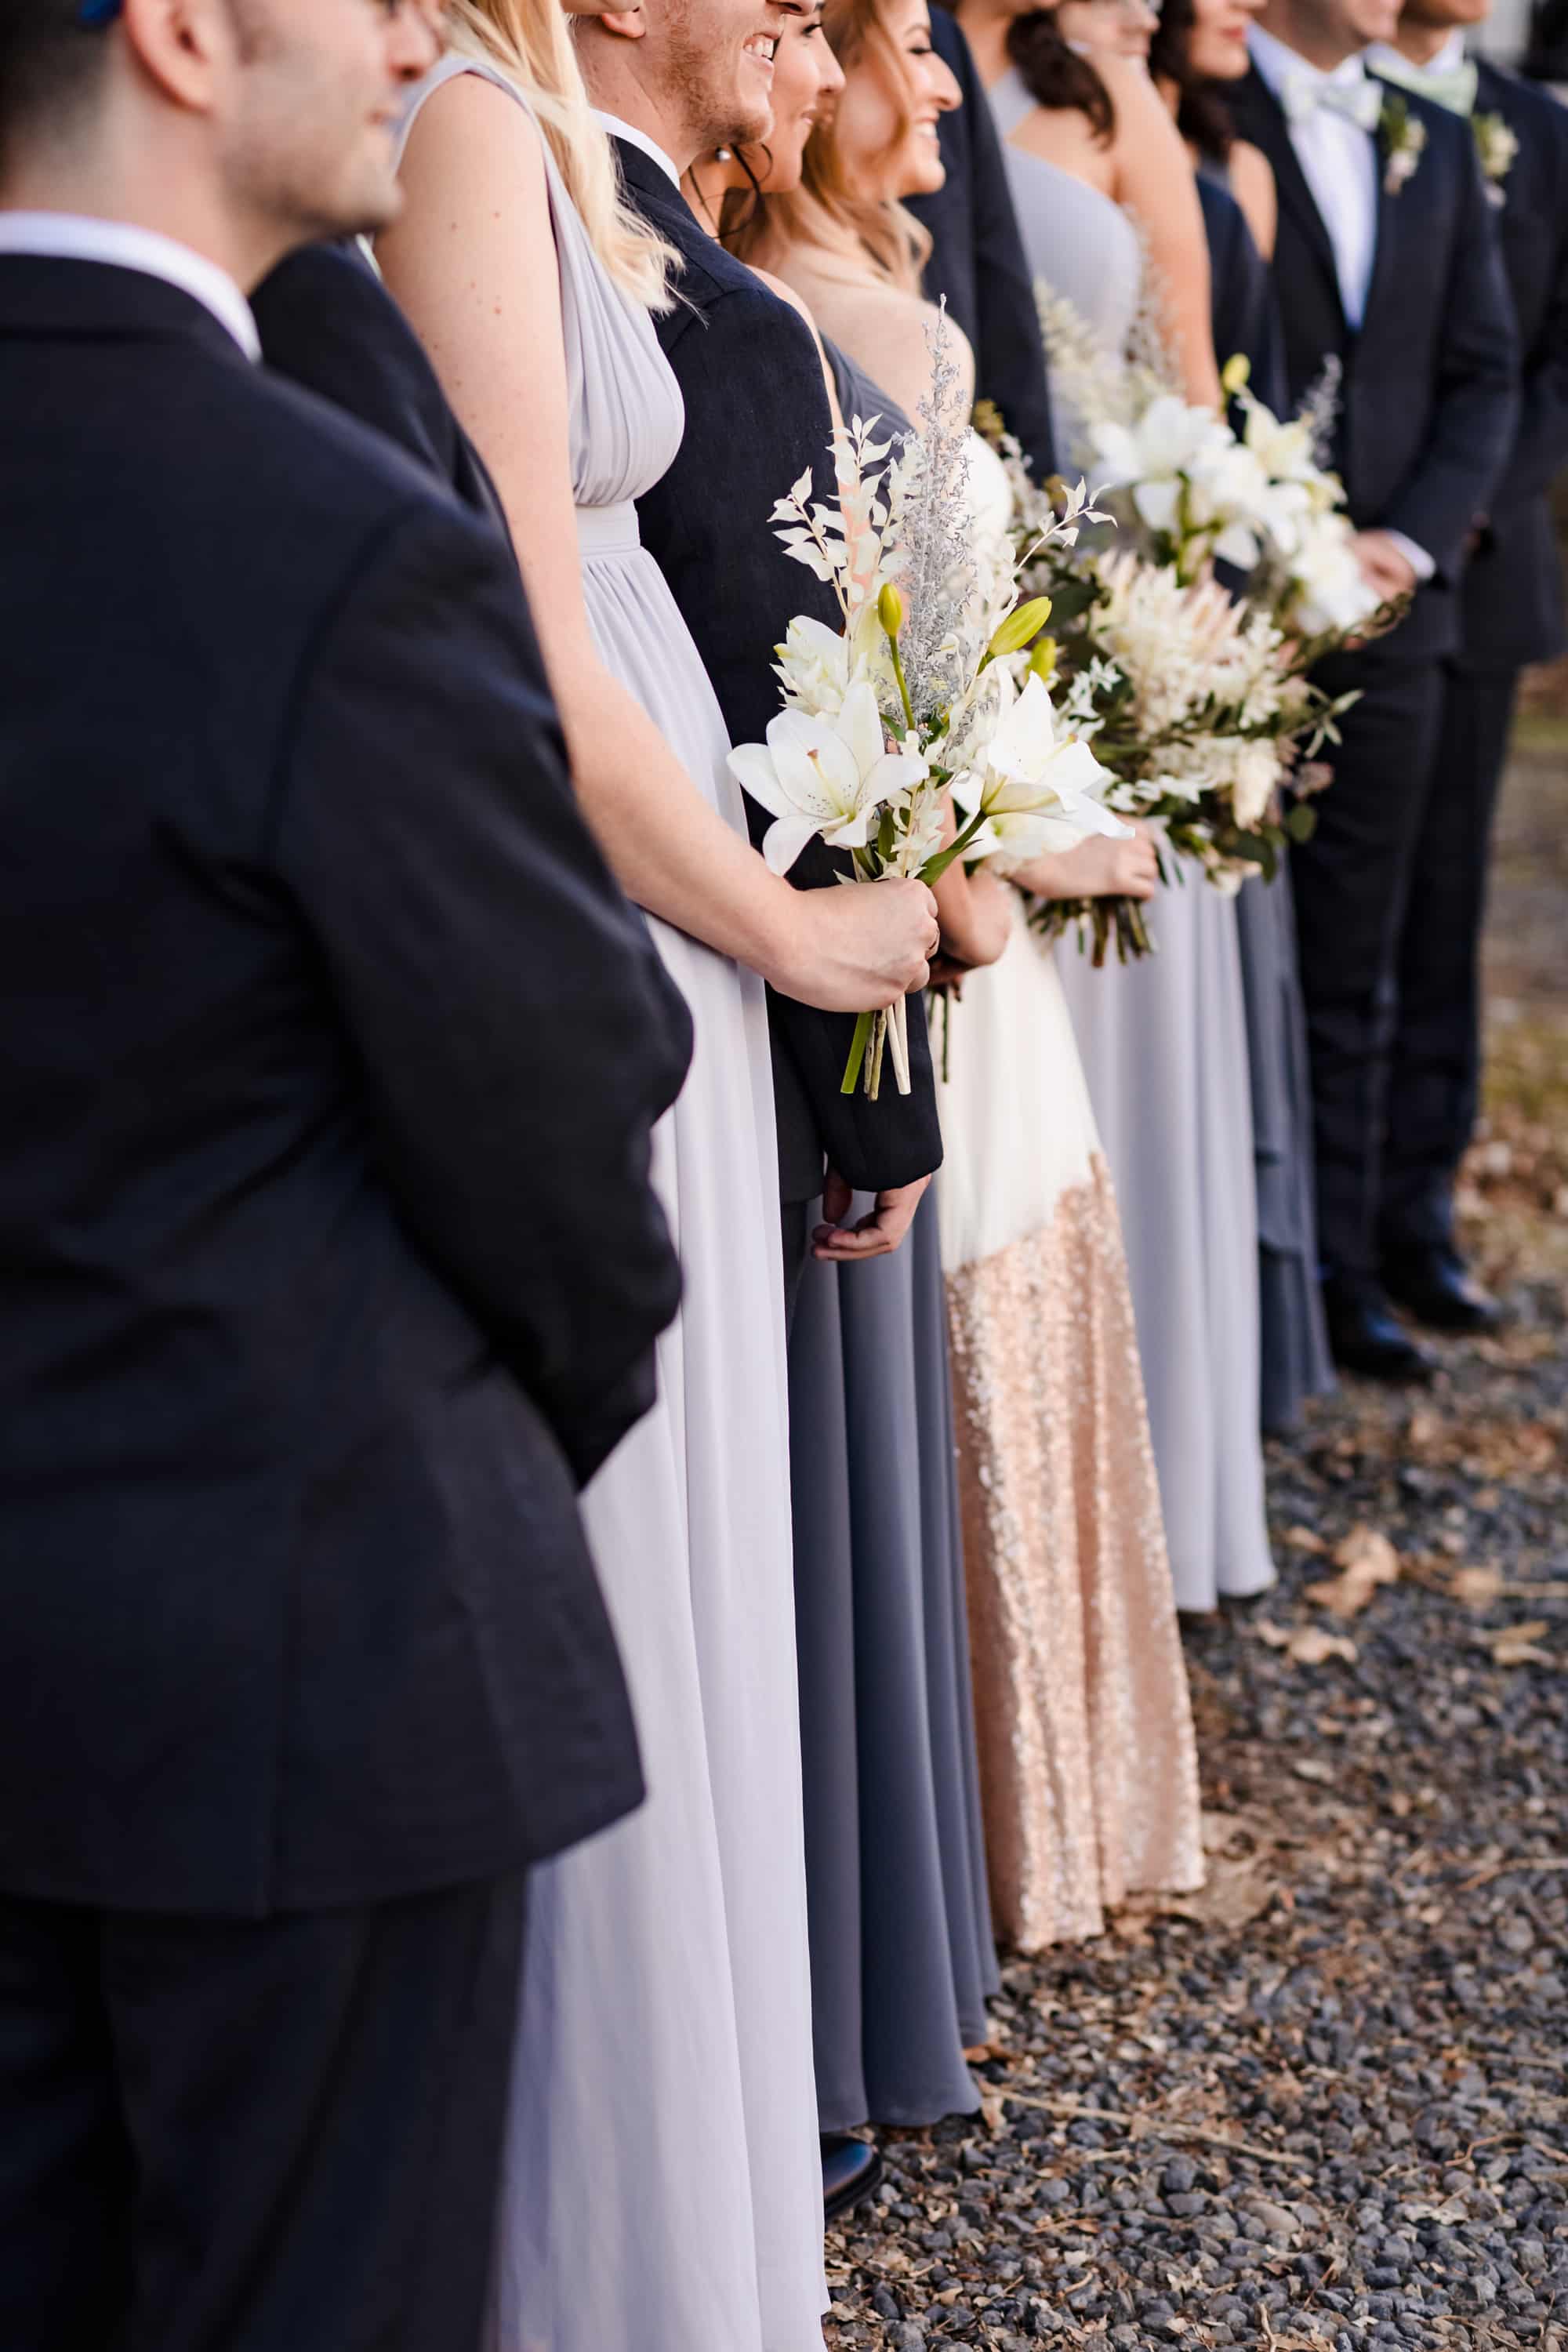 wedding party photos, lilies in wedding flowers, simple wedding flowers, simple bridal party flowers, simple bridesmaid flowers